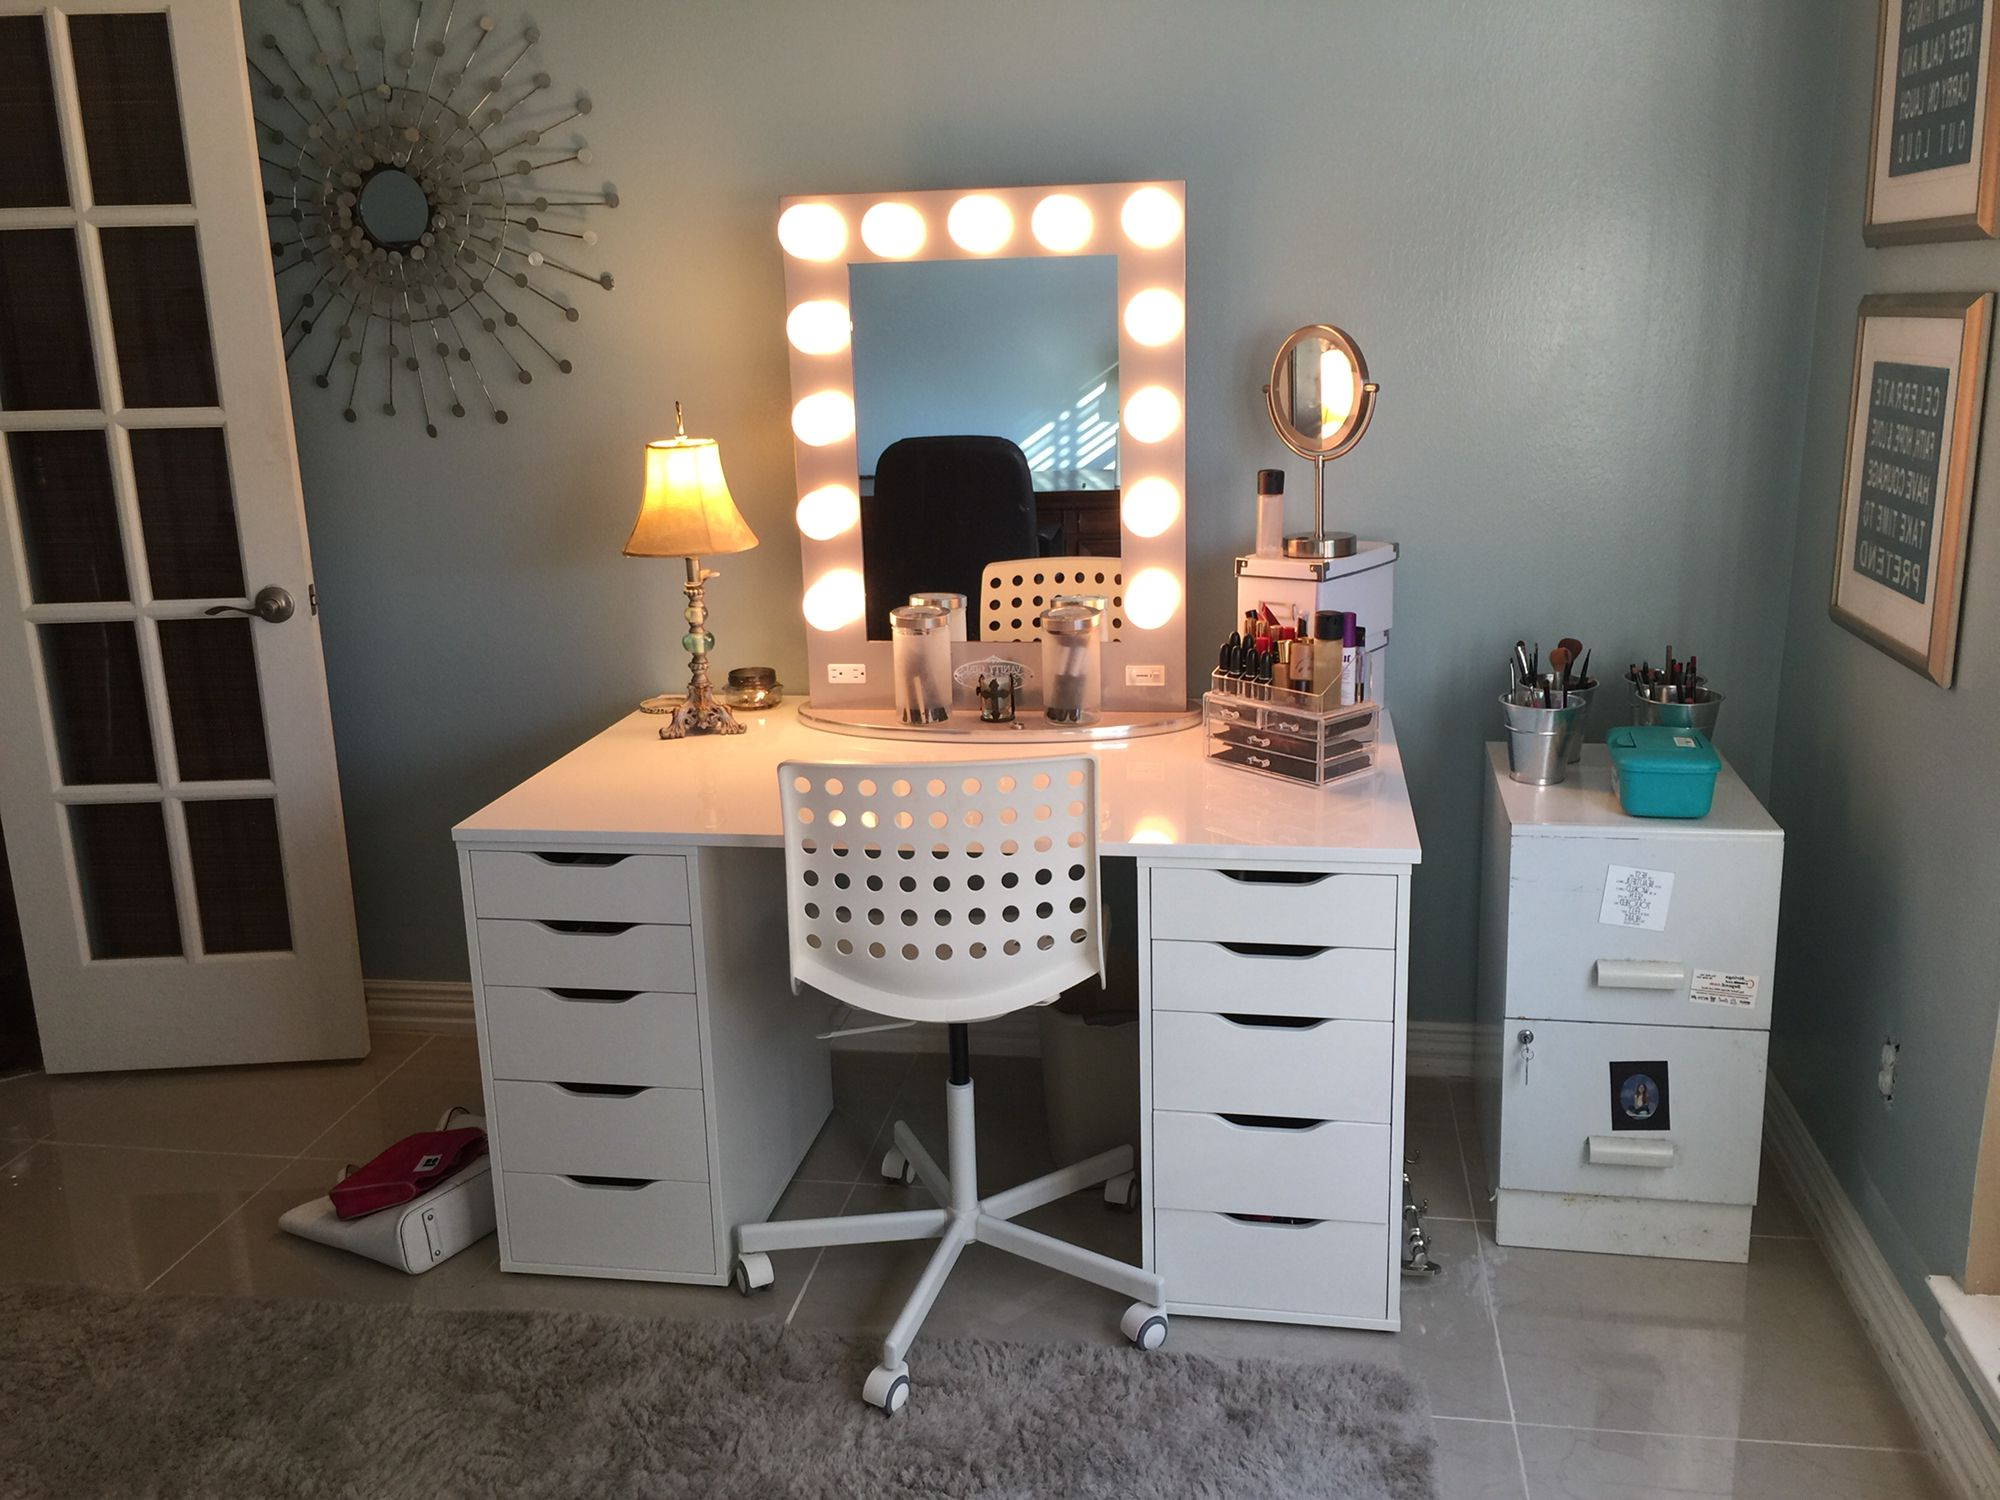 Hollywood Mirror And Ikea Desk Top And Storage Units For